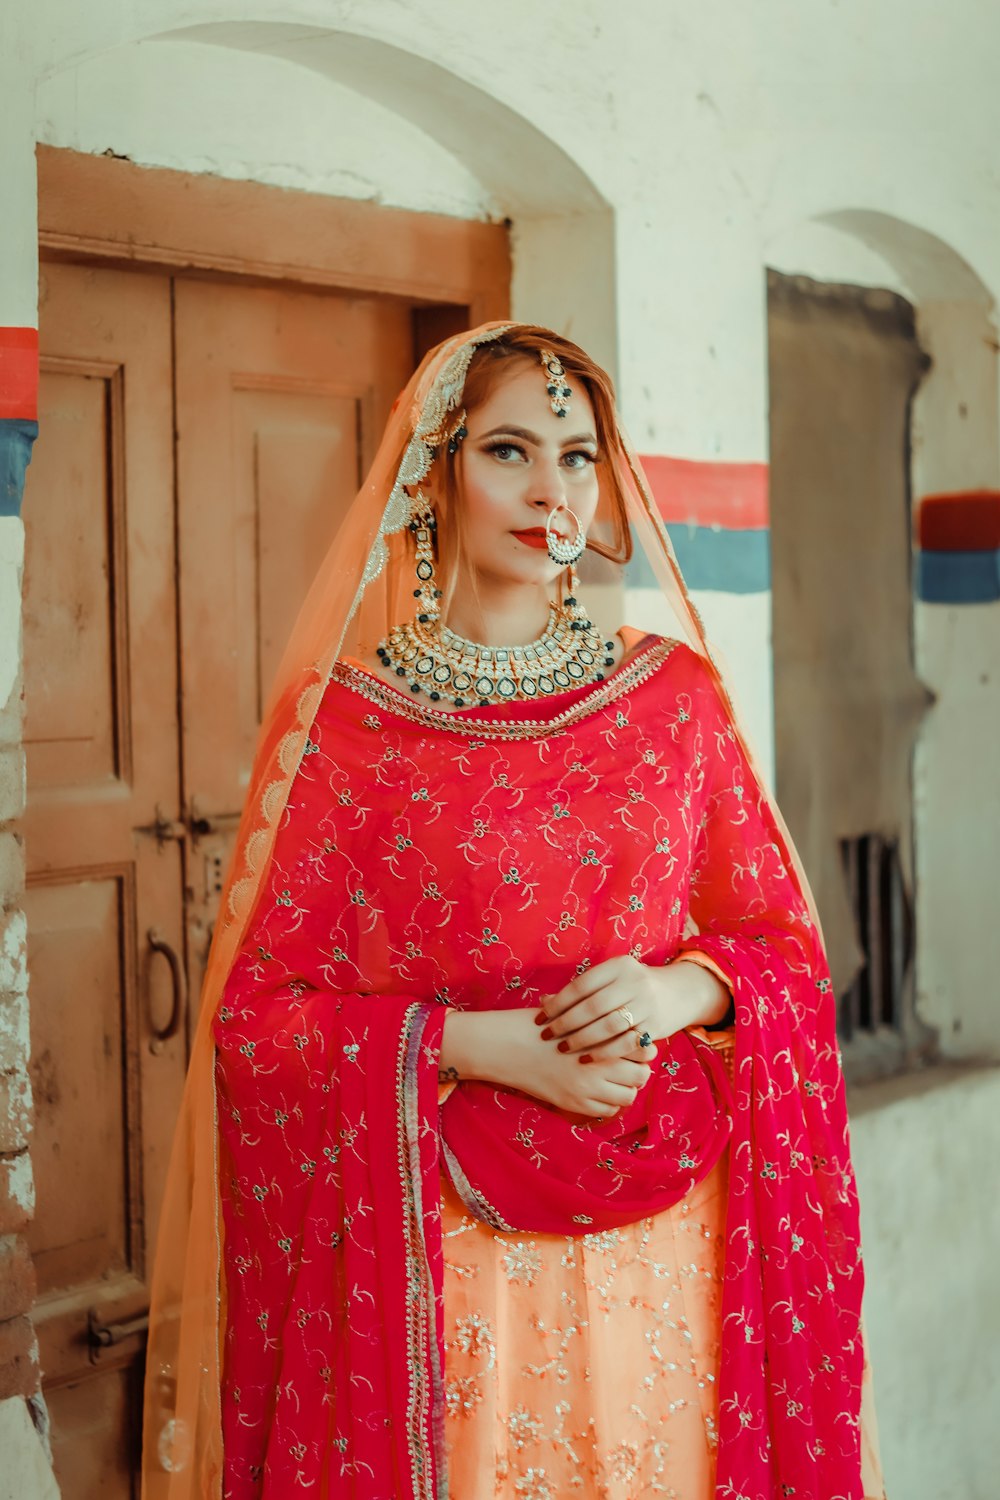 woman in red and white floral sari standing near brown wooden wall during daytime